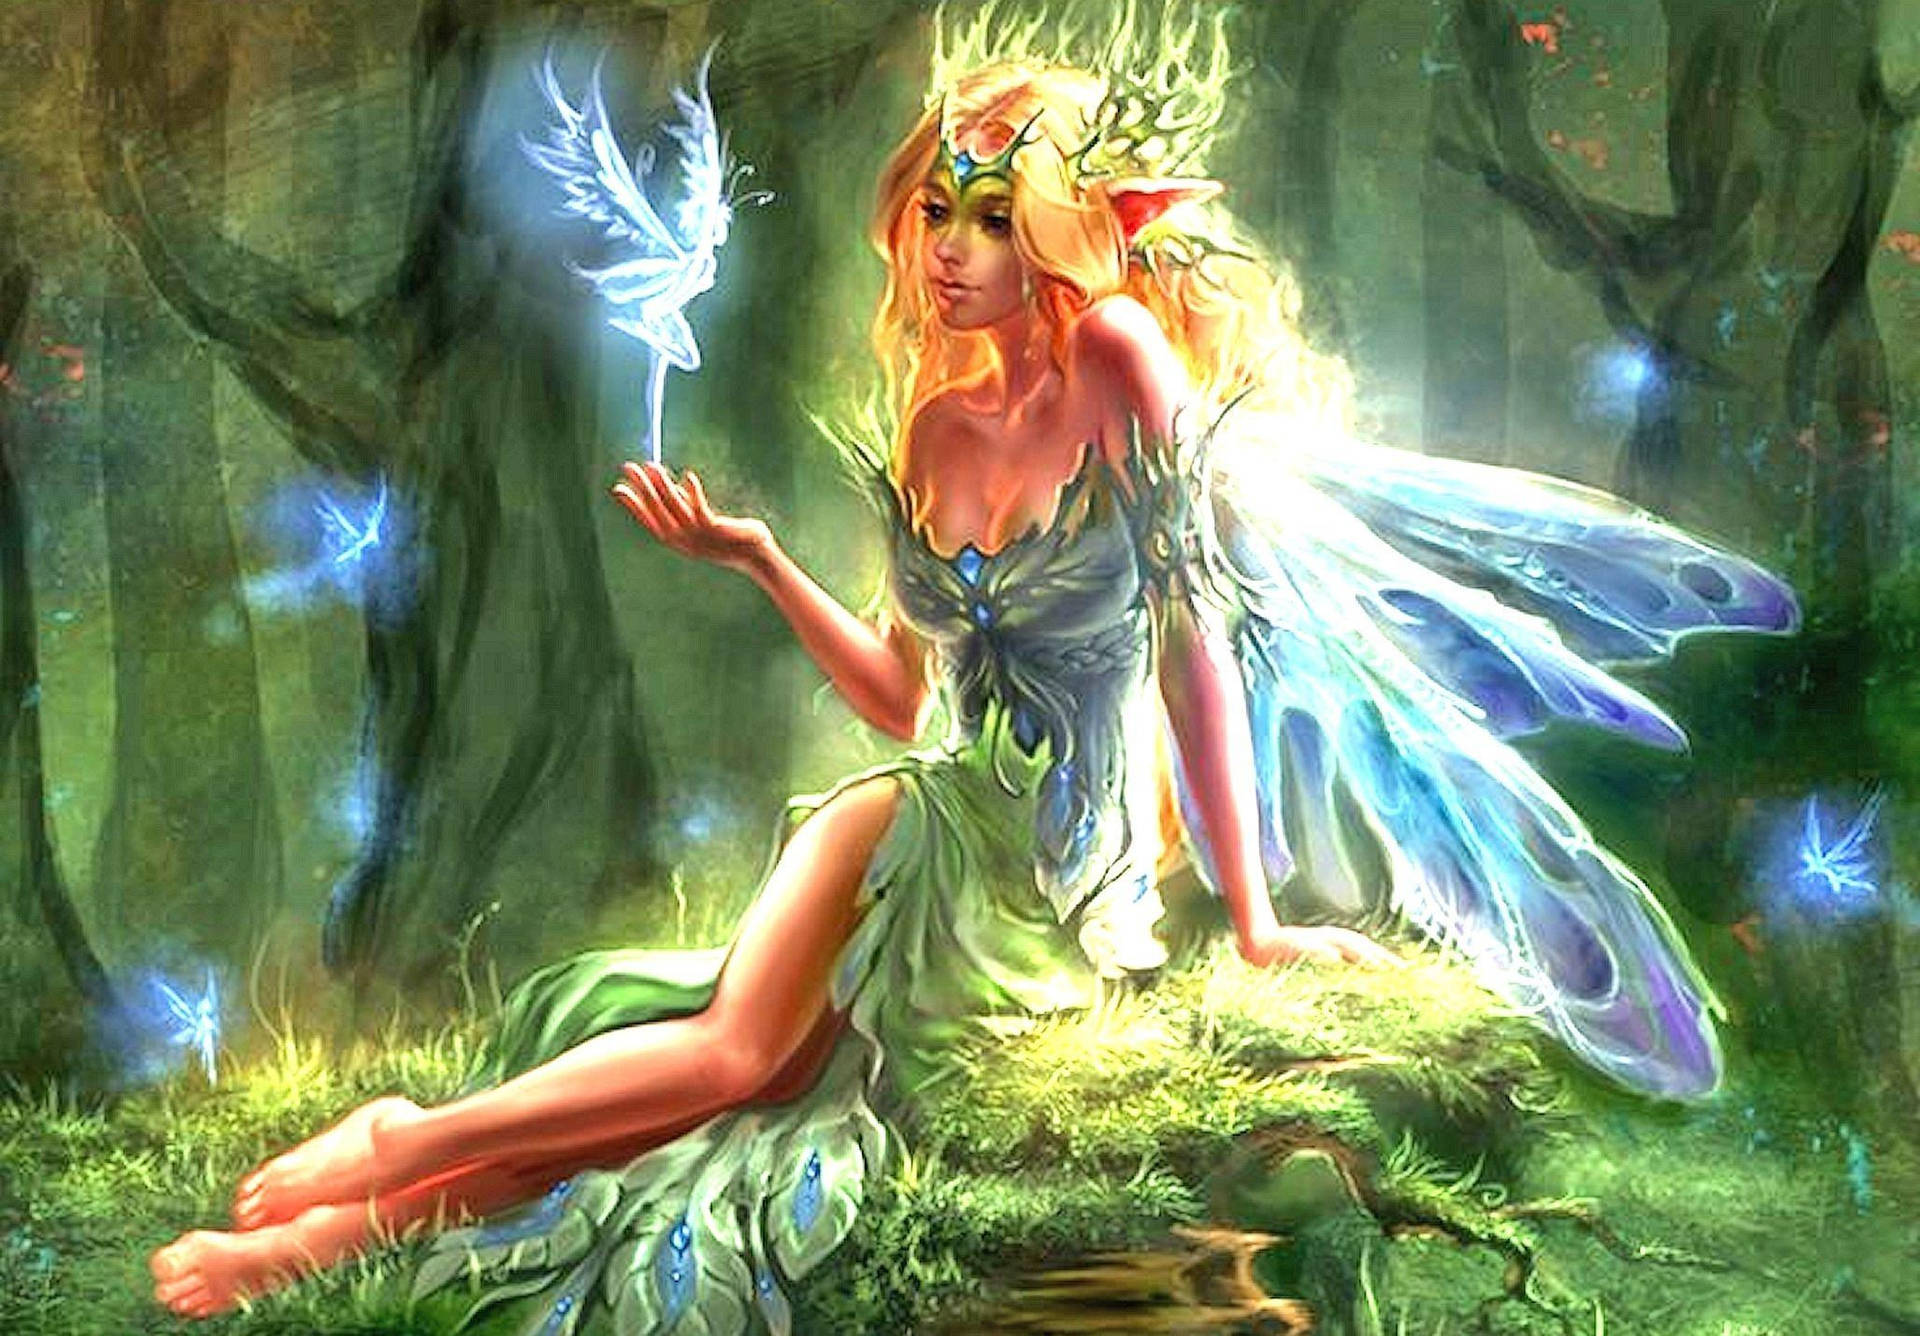 Free Fairy Wallpaper Downloads, [200+] Fairy Wallpapers for FREE |  